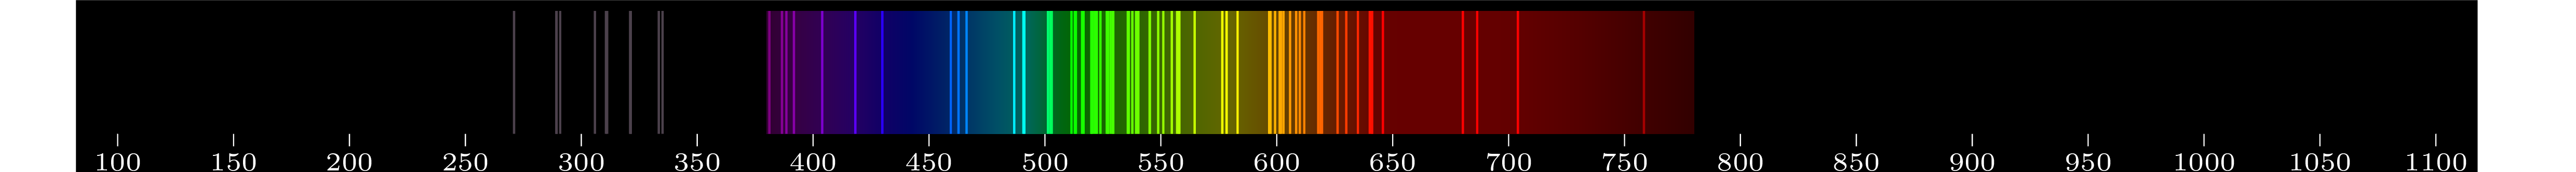 emmision spectra of element Eu